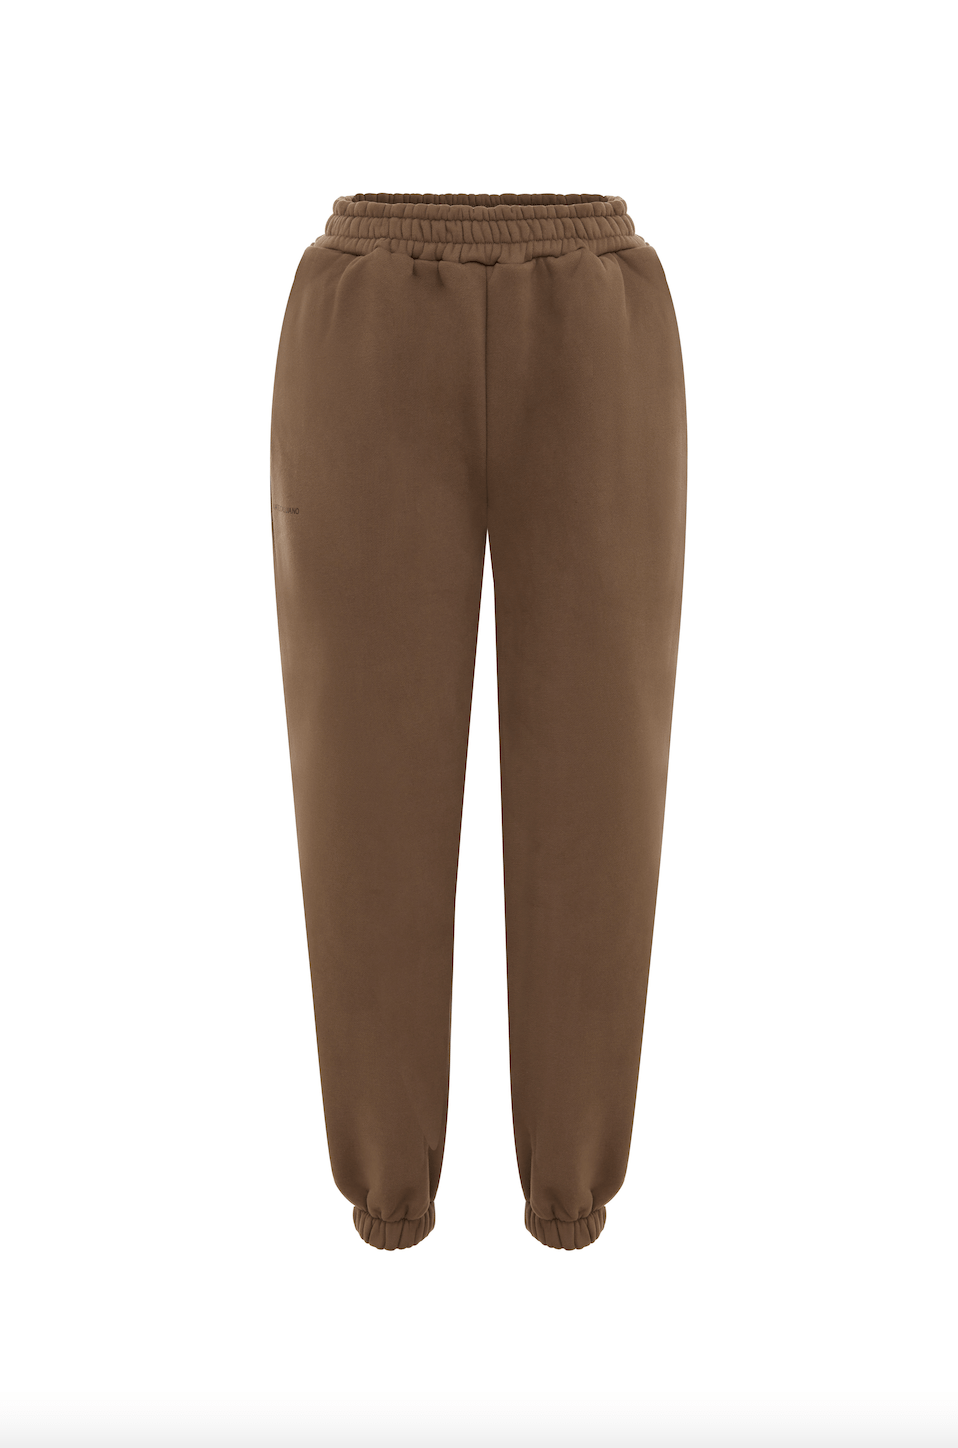 LUXE 23 Tracksuit Pants - Chocolate | Be Activewear